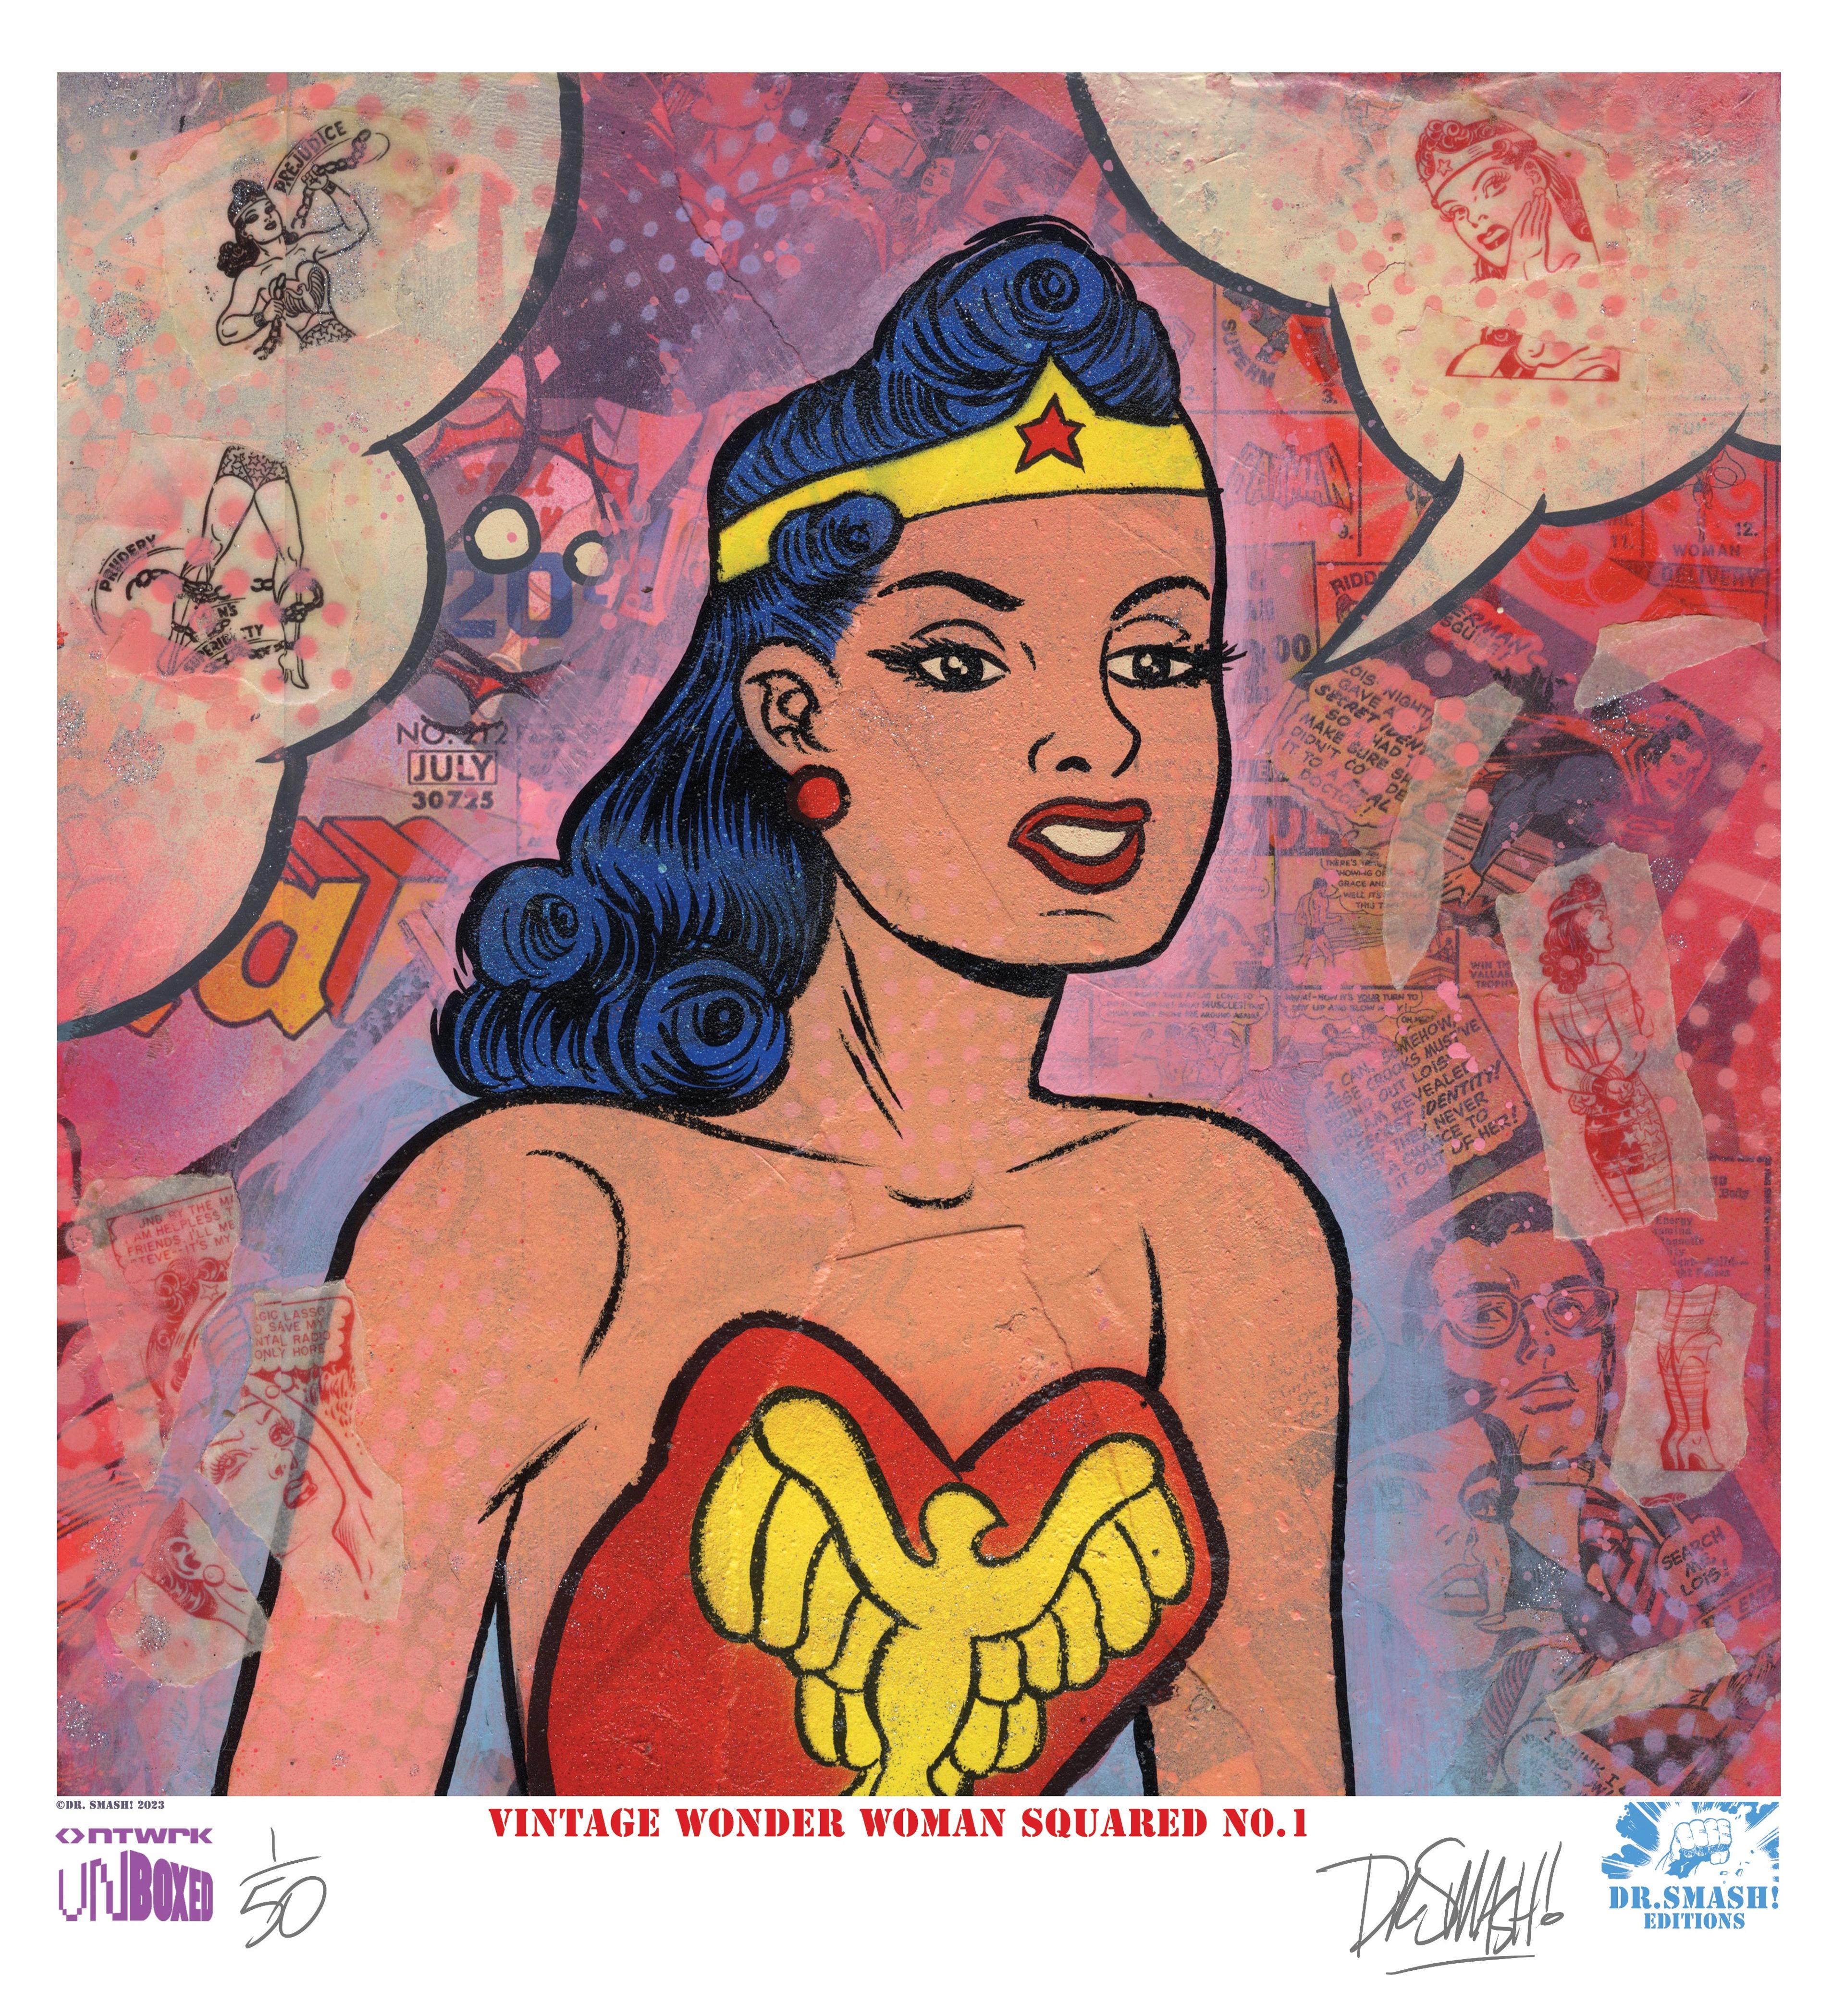 "Wonder Woman Squared No. 1" by Dr. Smash! NTWRK UNBOXED Limited